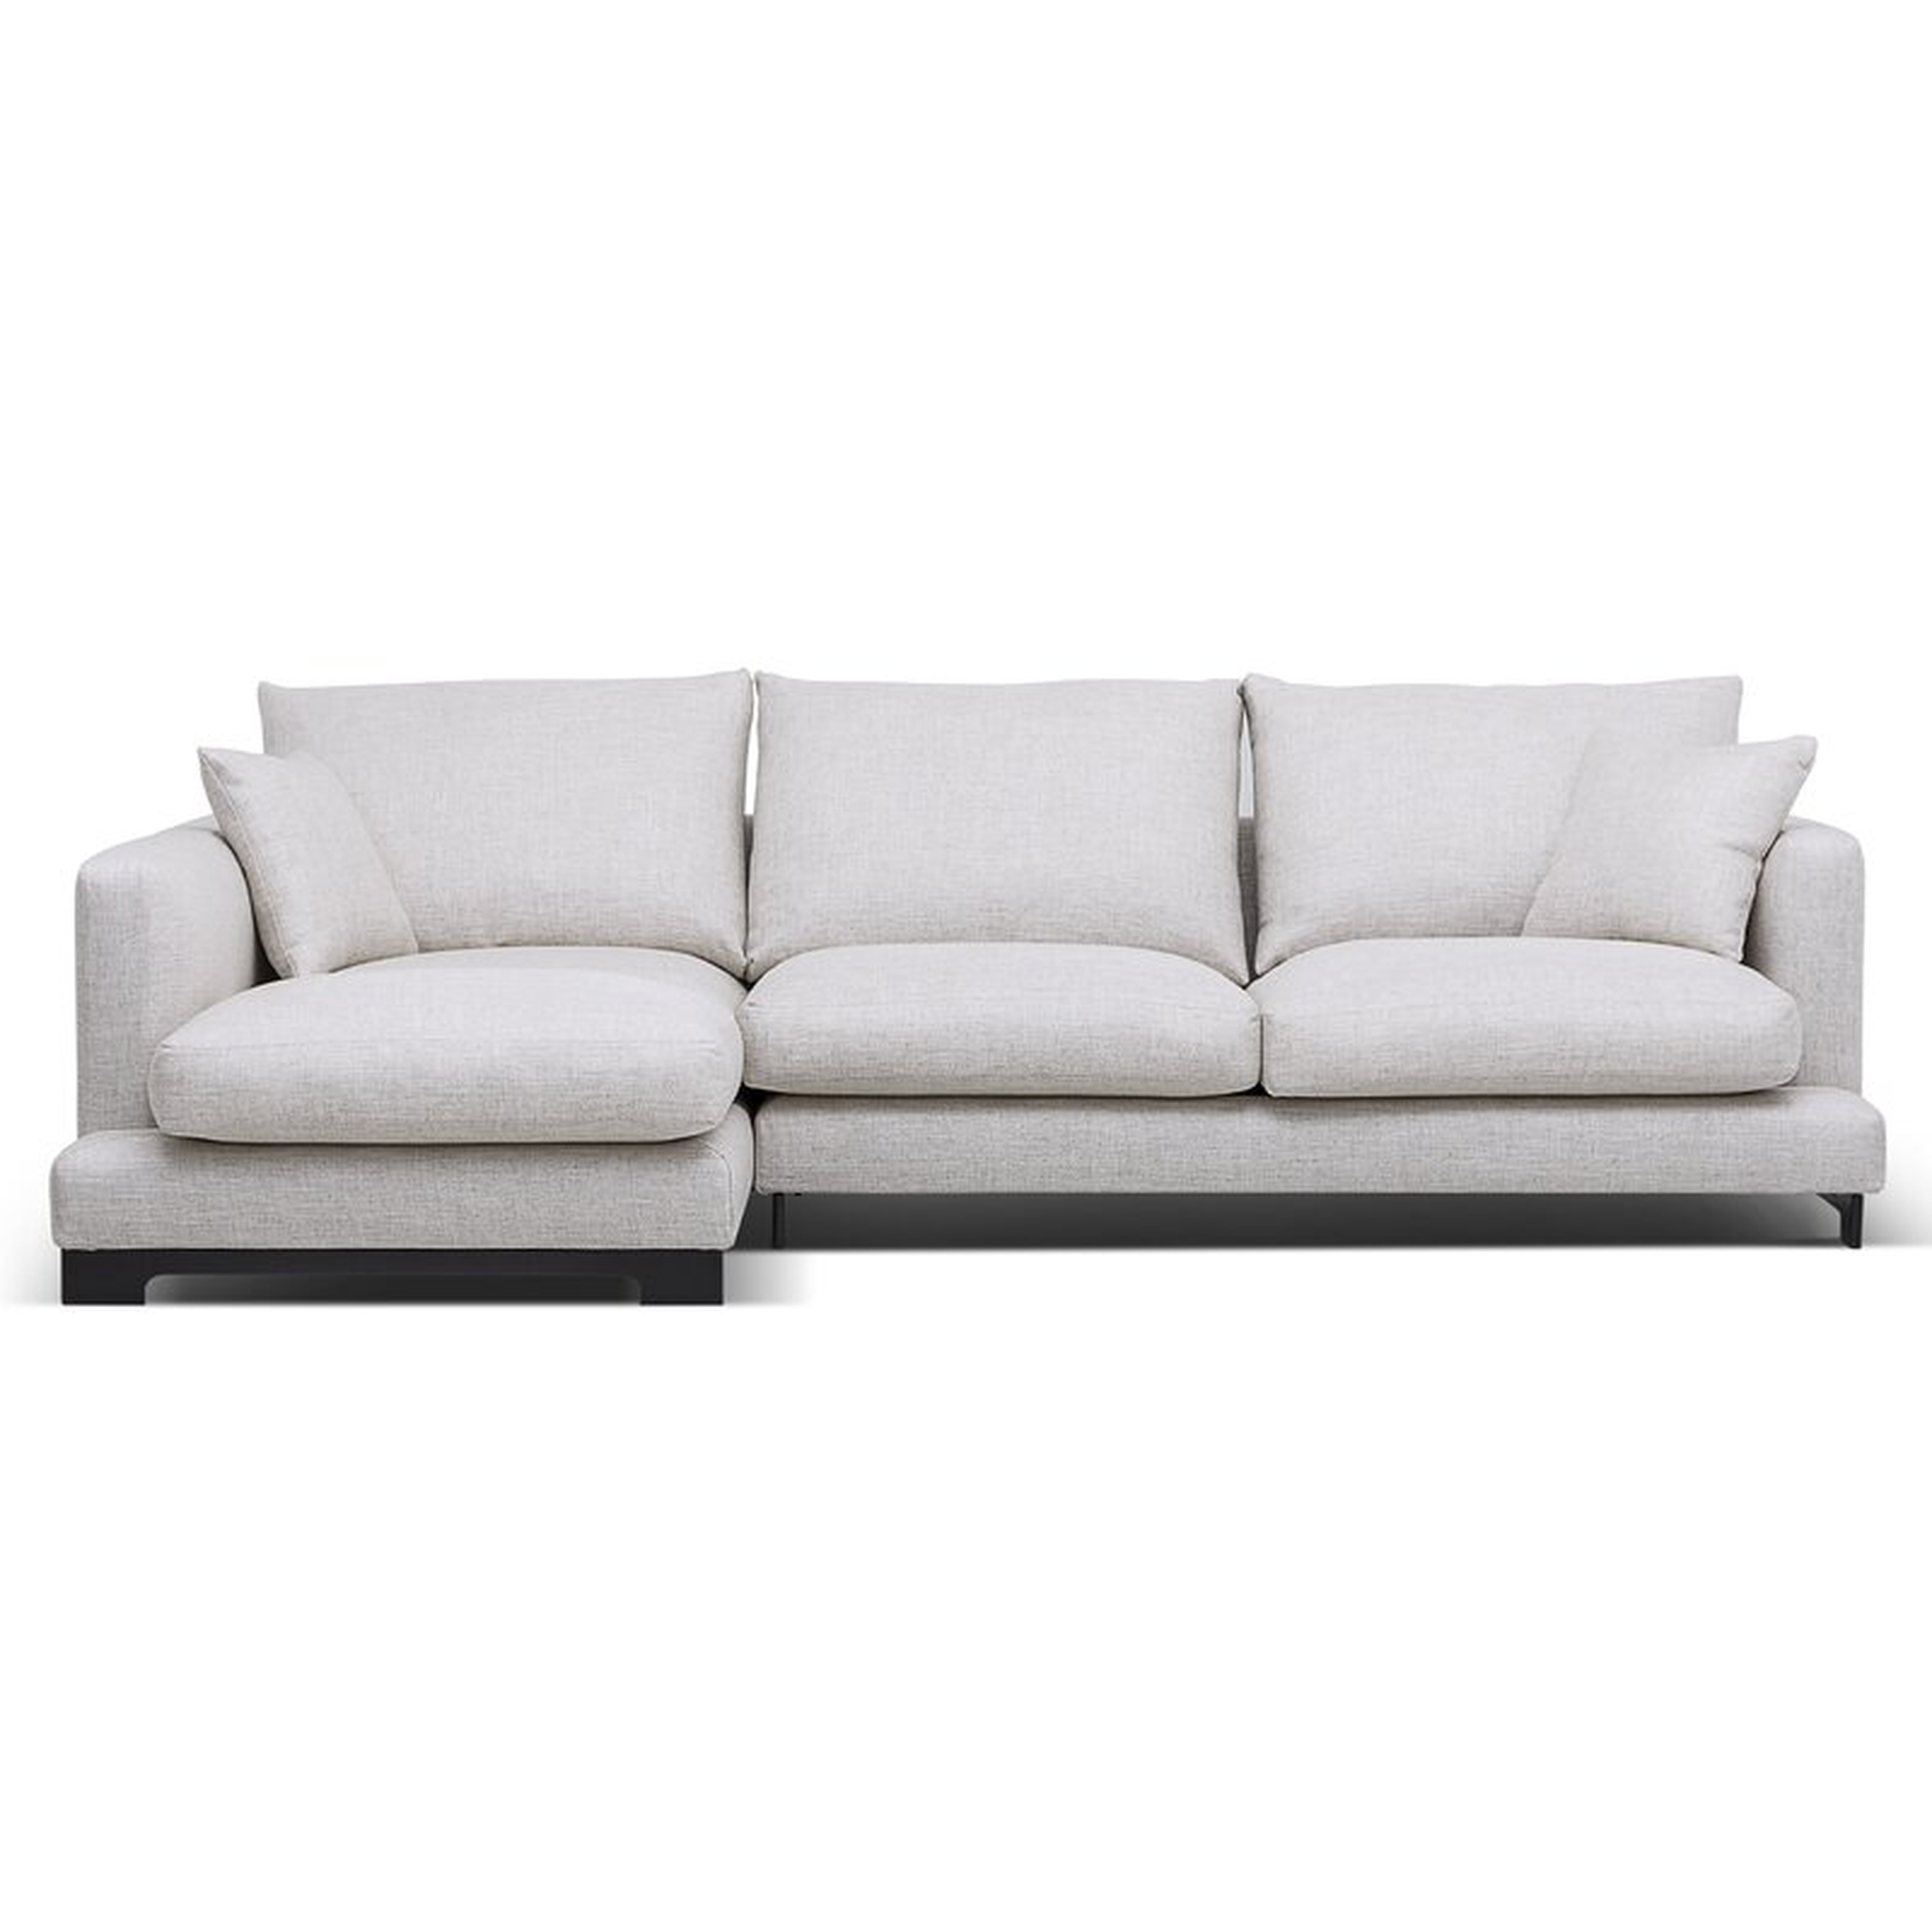 Camerich Lazy Time Sectional Fabric: White, Orientation: Left Hand Facing - Perigold